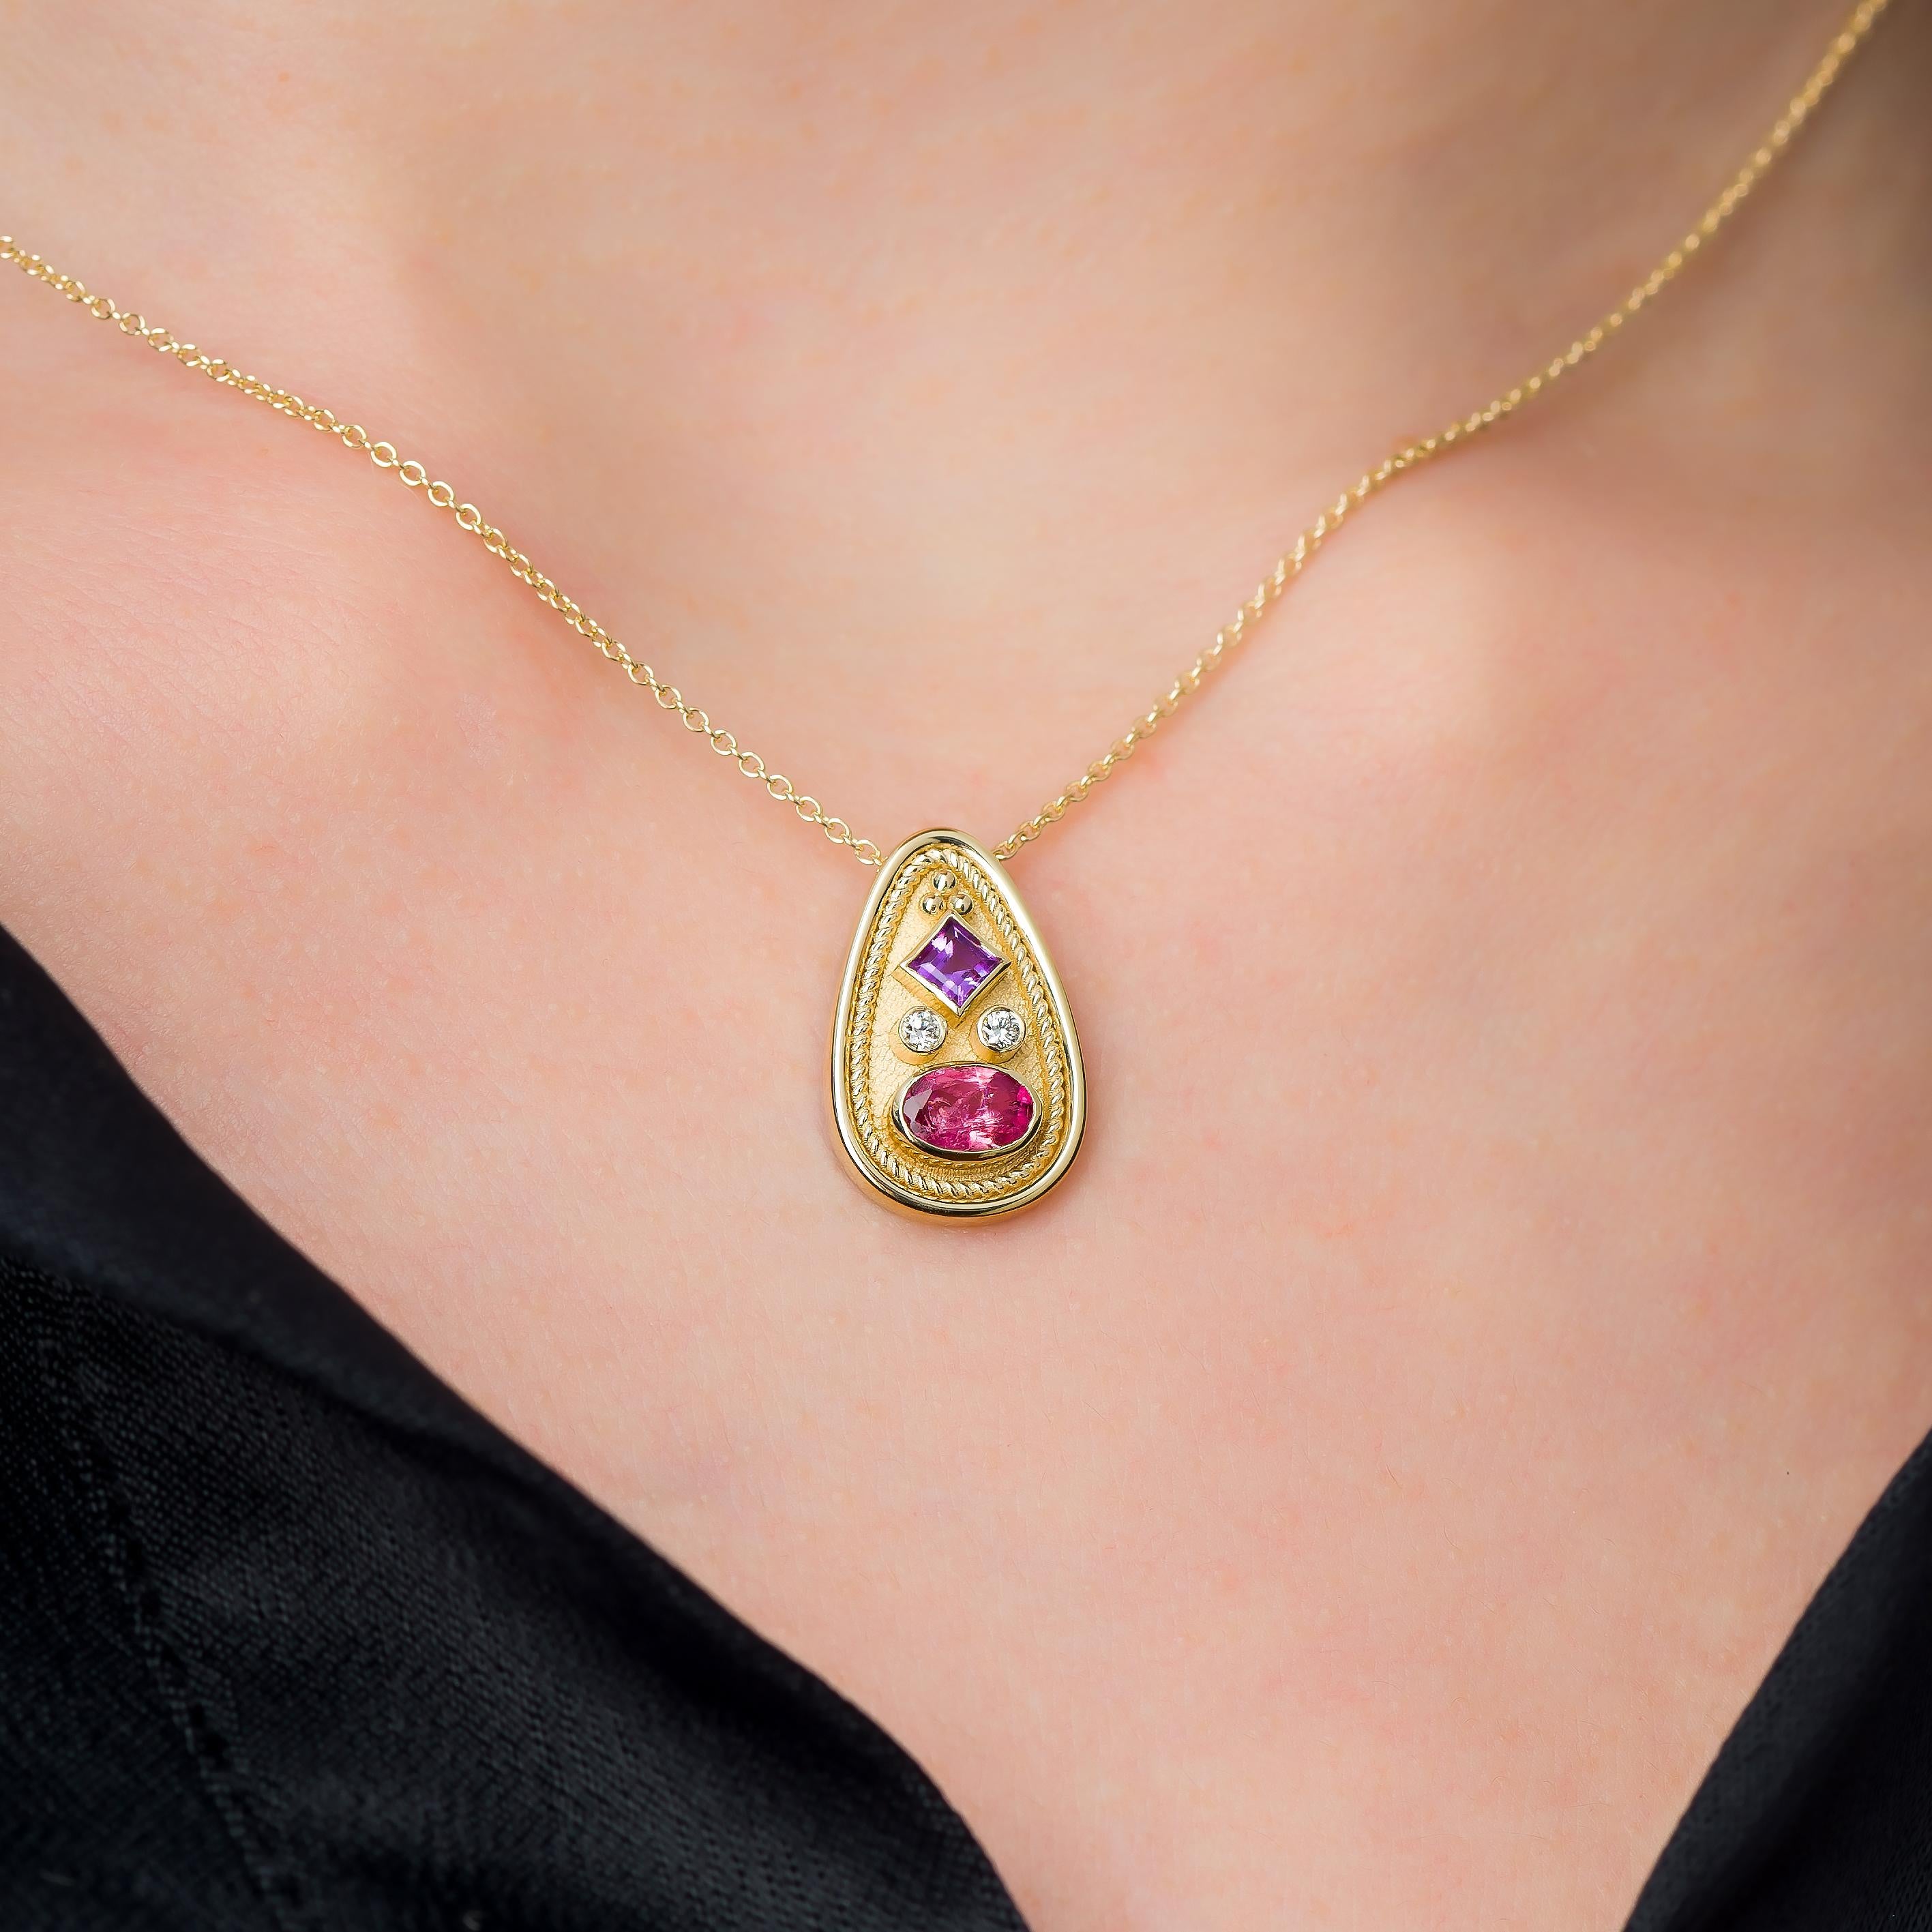 Discover the exquisite charm of our rounded pear-shaped gold pendant, adorned with a square amethyst and an oval pink tourmaline, a harmonious blend of gemstones and design that exudes timeless elegance.

100% handmade in our workshop.

Metal: 18K